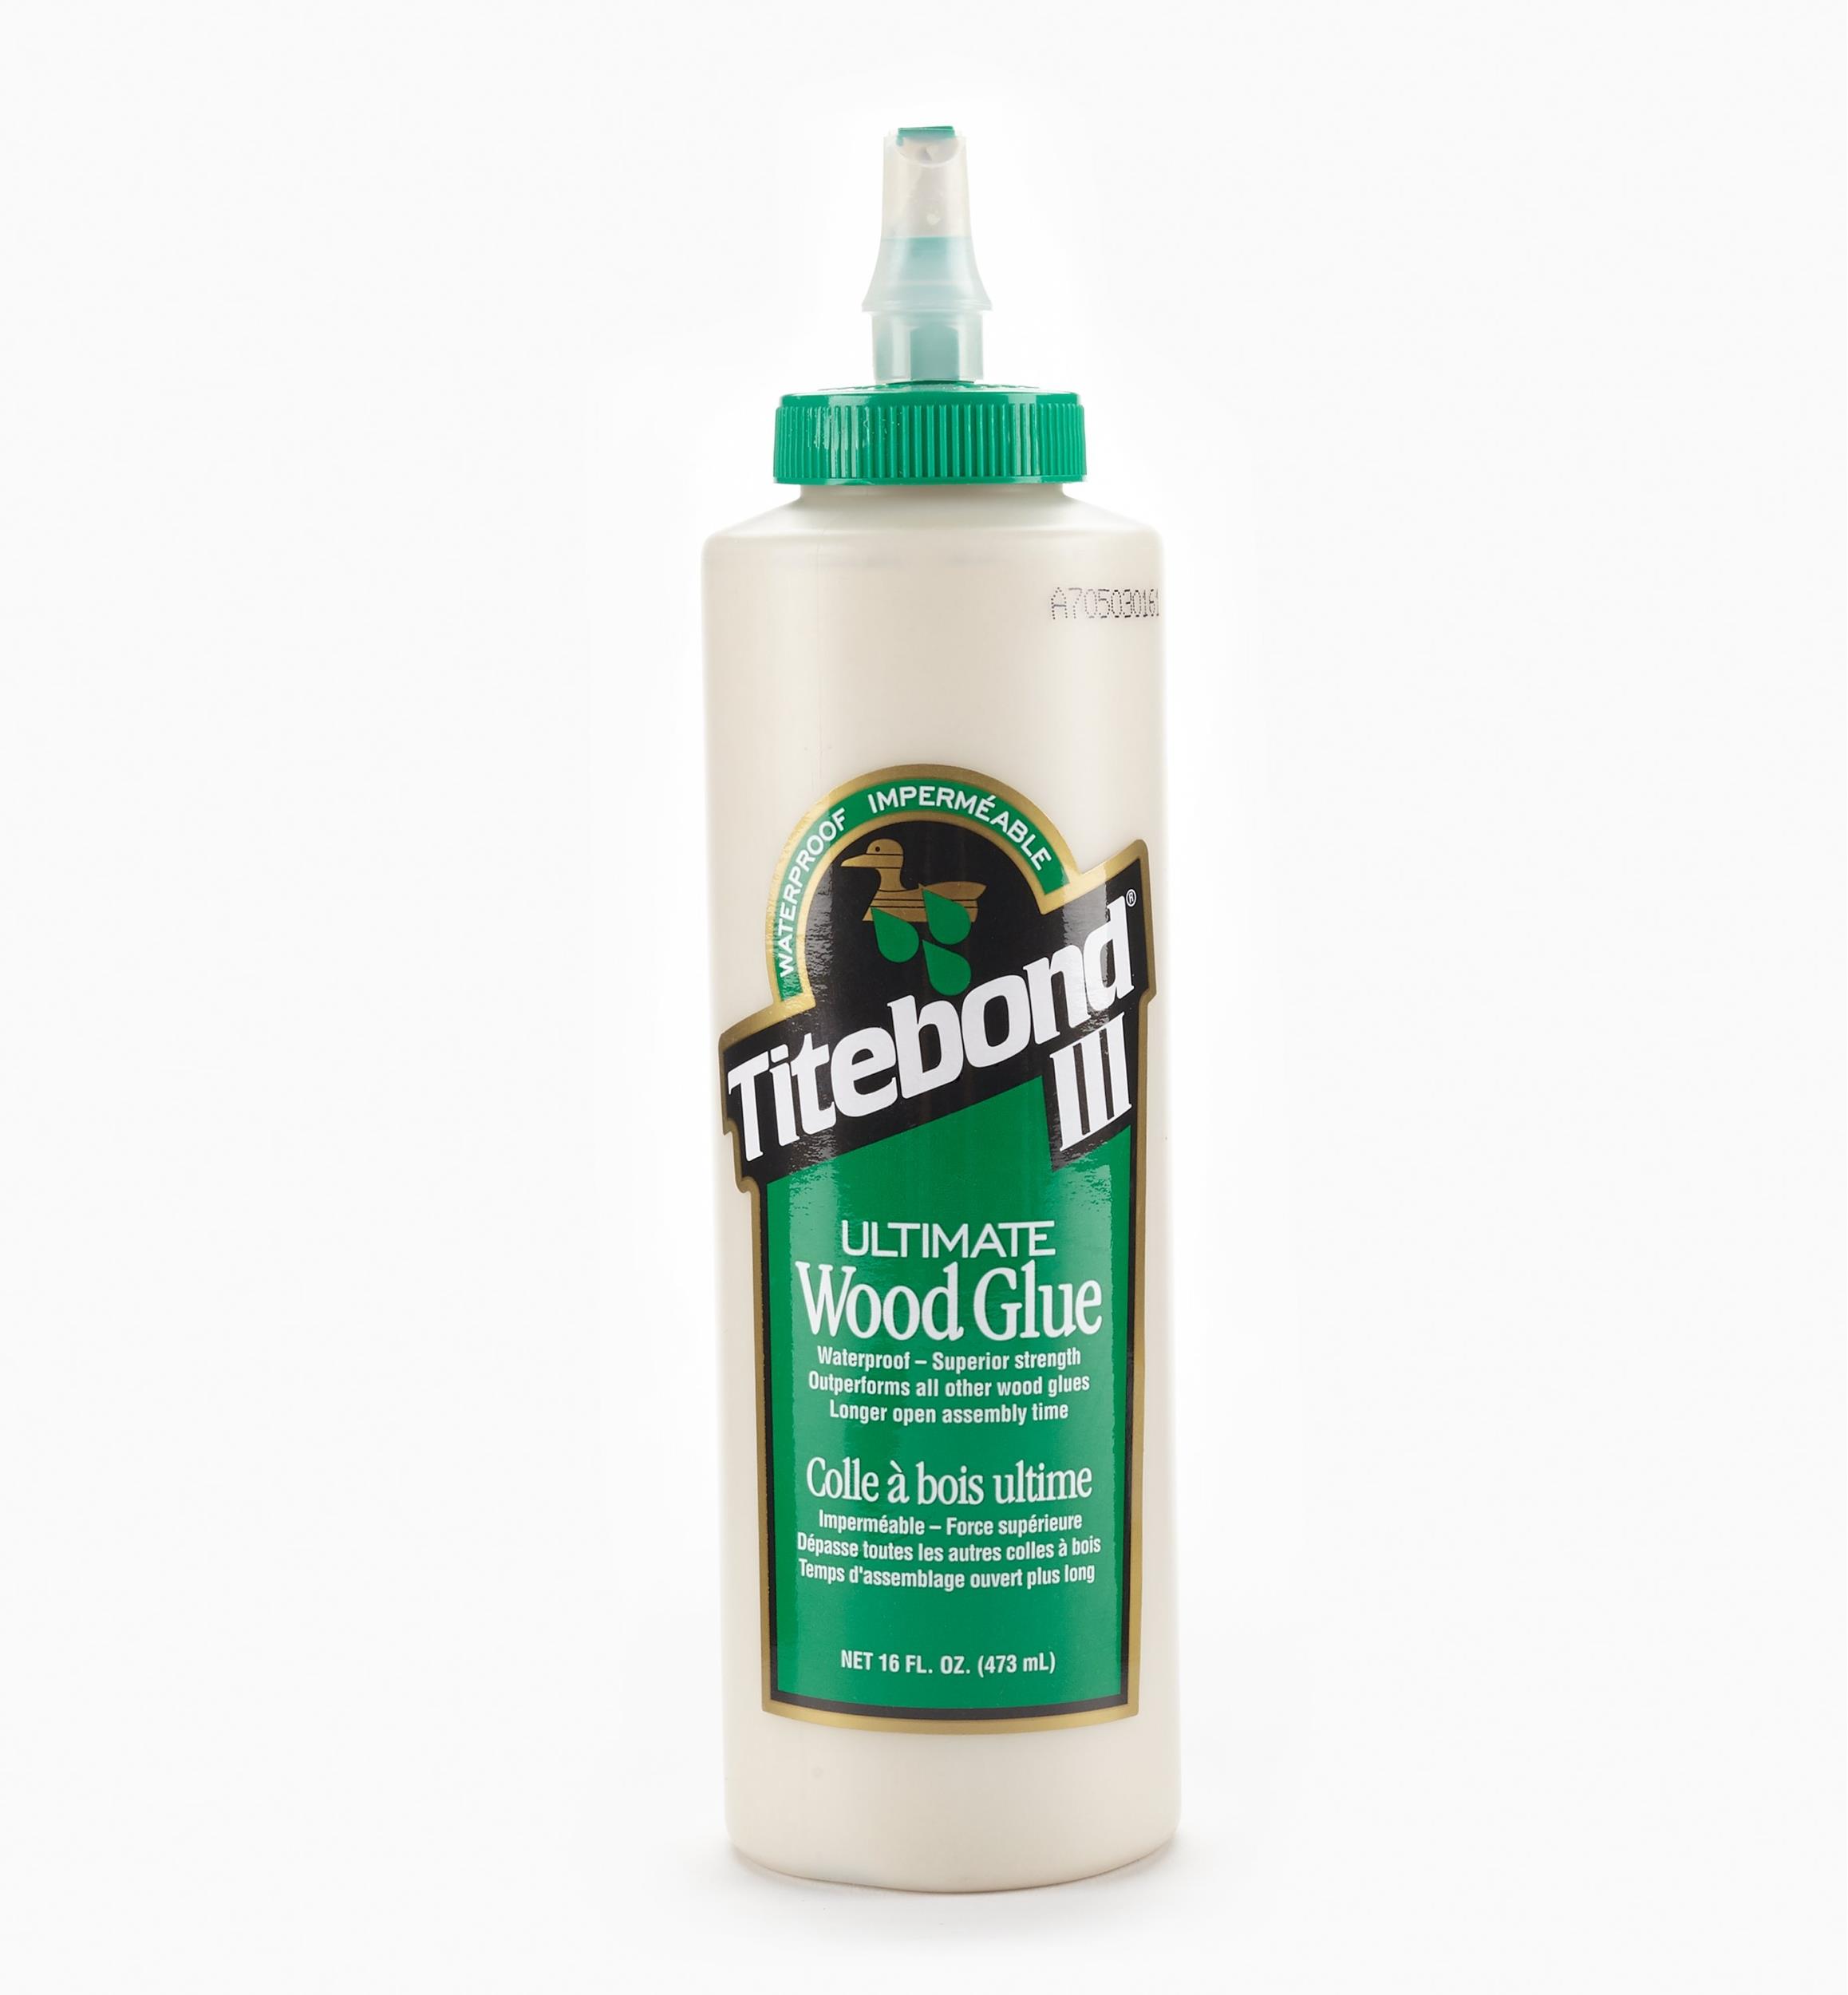 Starbond Thin CA Glue - Lee Valley Tools